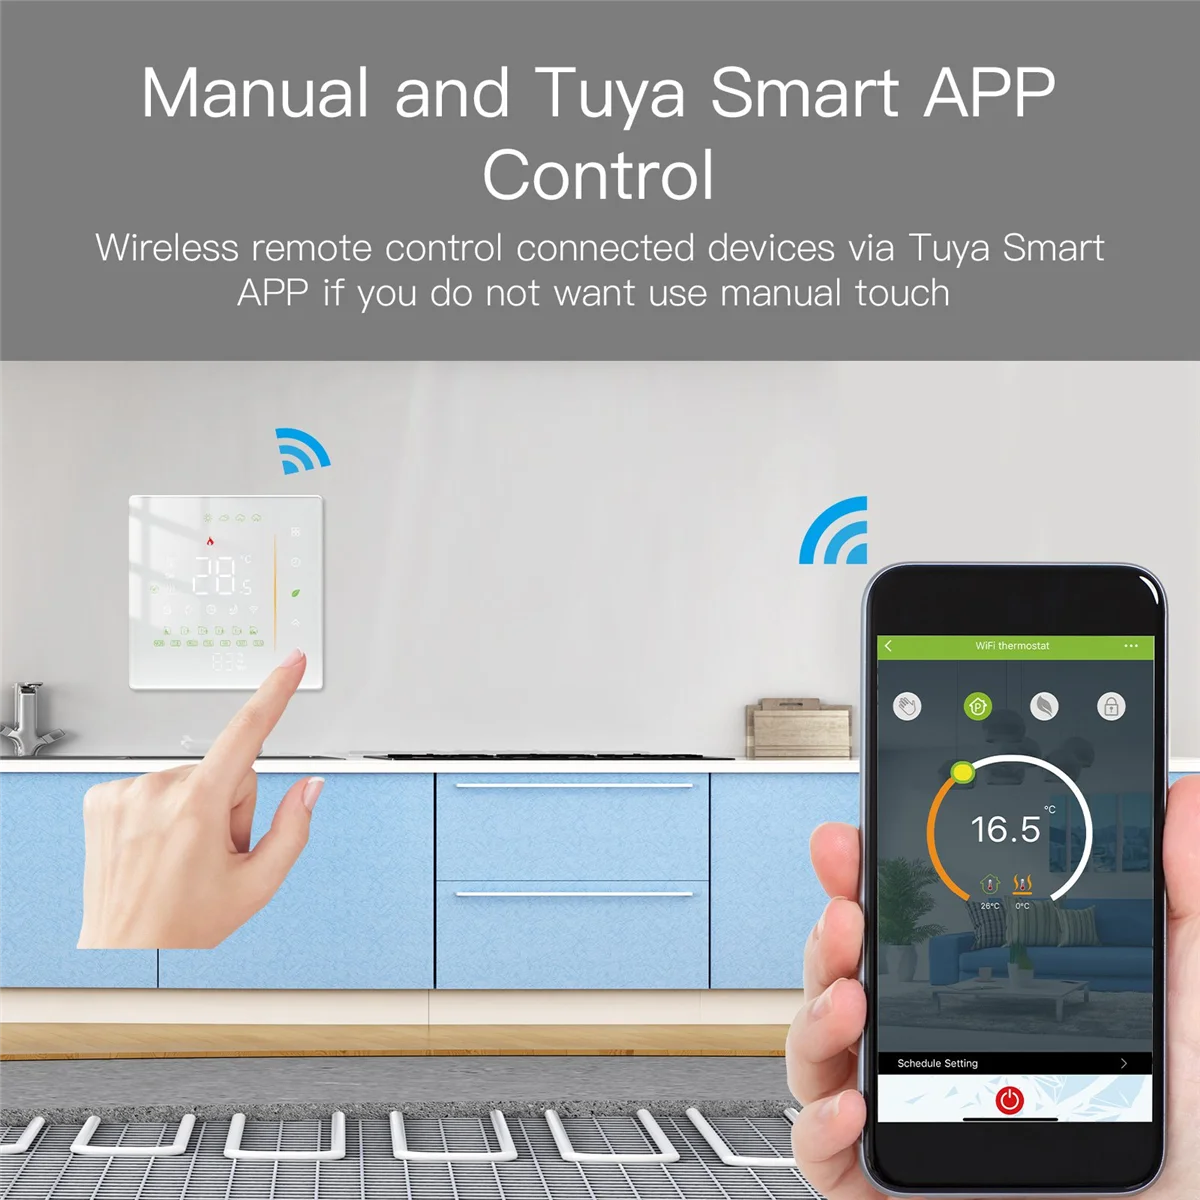 wifi-water-heating-thermostat-water-boiler-temperature-control-tuya-smart-app-control-for-alexa-google-voice-white